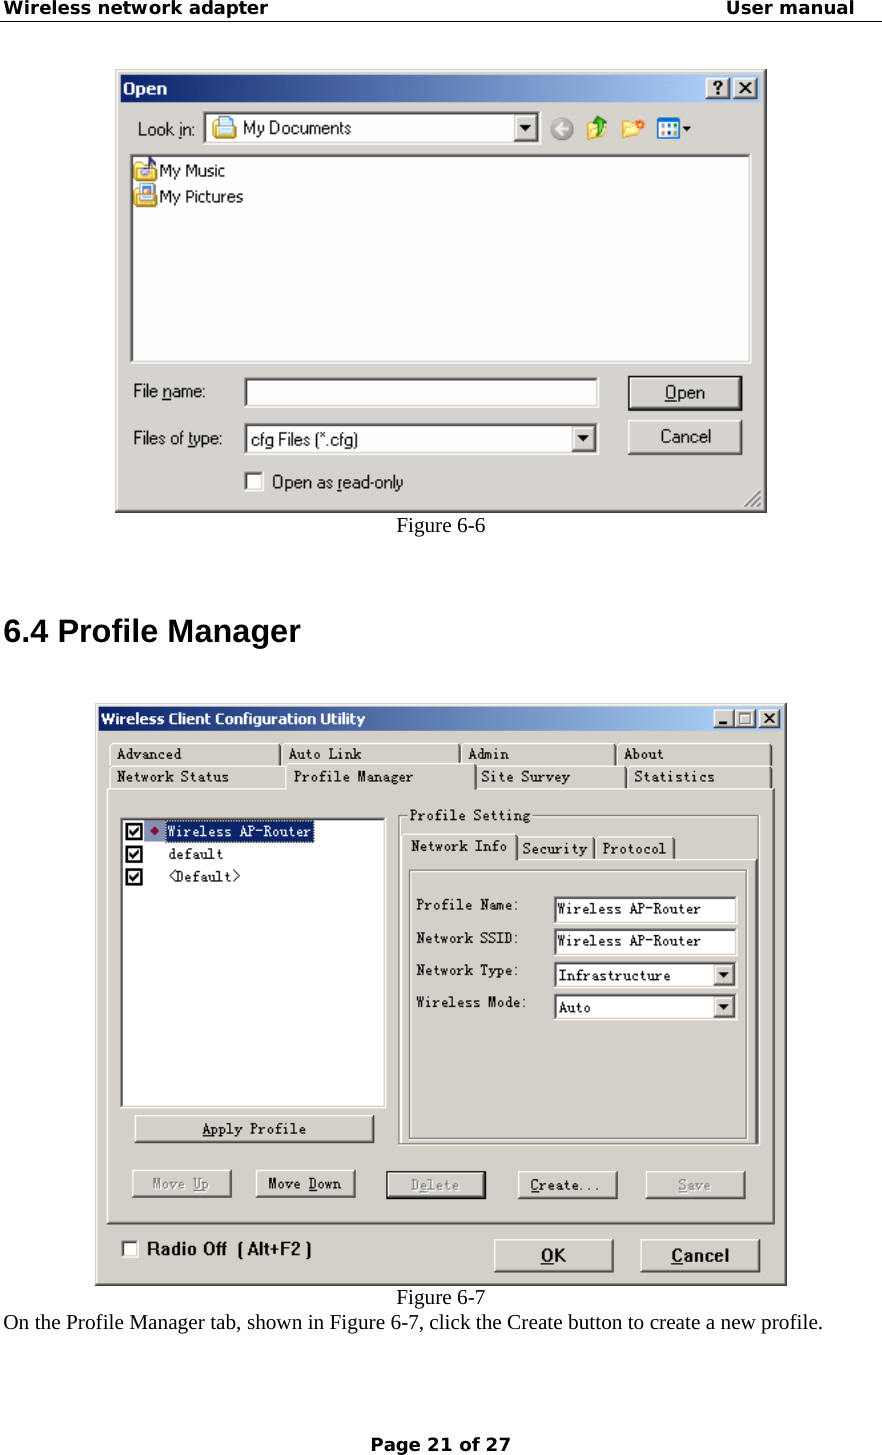 Wireless network adapter                                                  User manual Page 21 of 27  Figure 6-6   6.4 Profile Manager  Figure 6-7 On the Profile Manager tab, shown in Figure 6-7, click the Create button to create a new profile. 